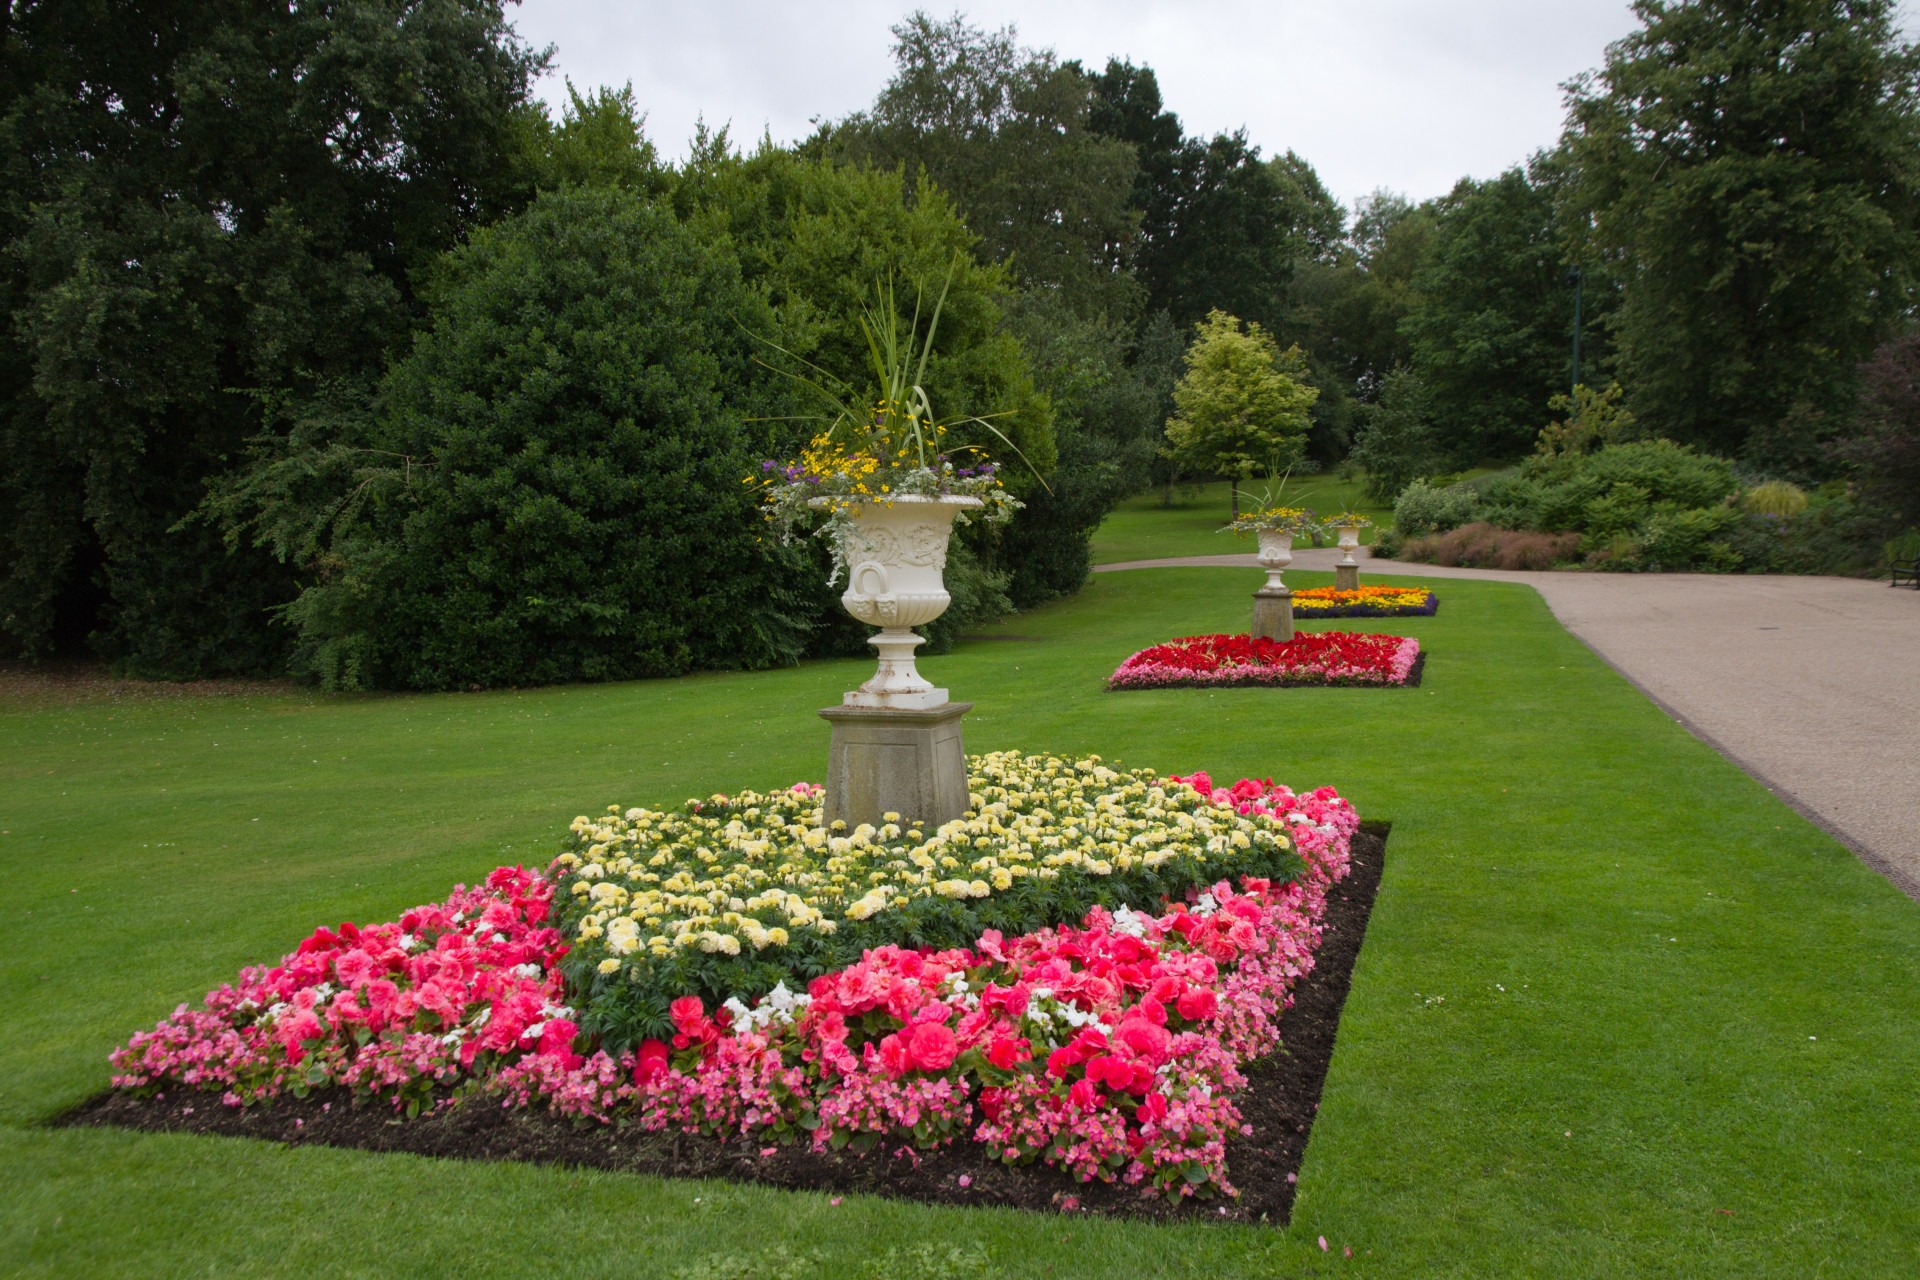 A flowerbed arrangement at Weston Park in Sheffield. <p>You may also like:<a href="https://www.starsinsider.com/n/500982?utm_source=msn.com&utm_medium=display&utm_campaign=referral_description&utm_content=344596v2en-us"> English words that have a different meaning in other languages</a></p>